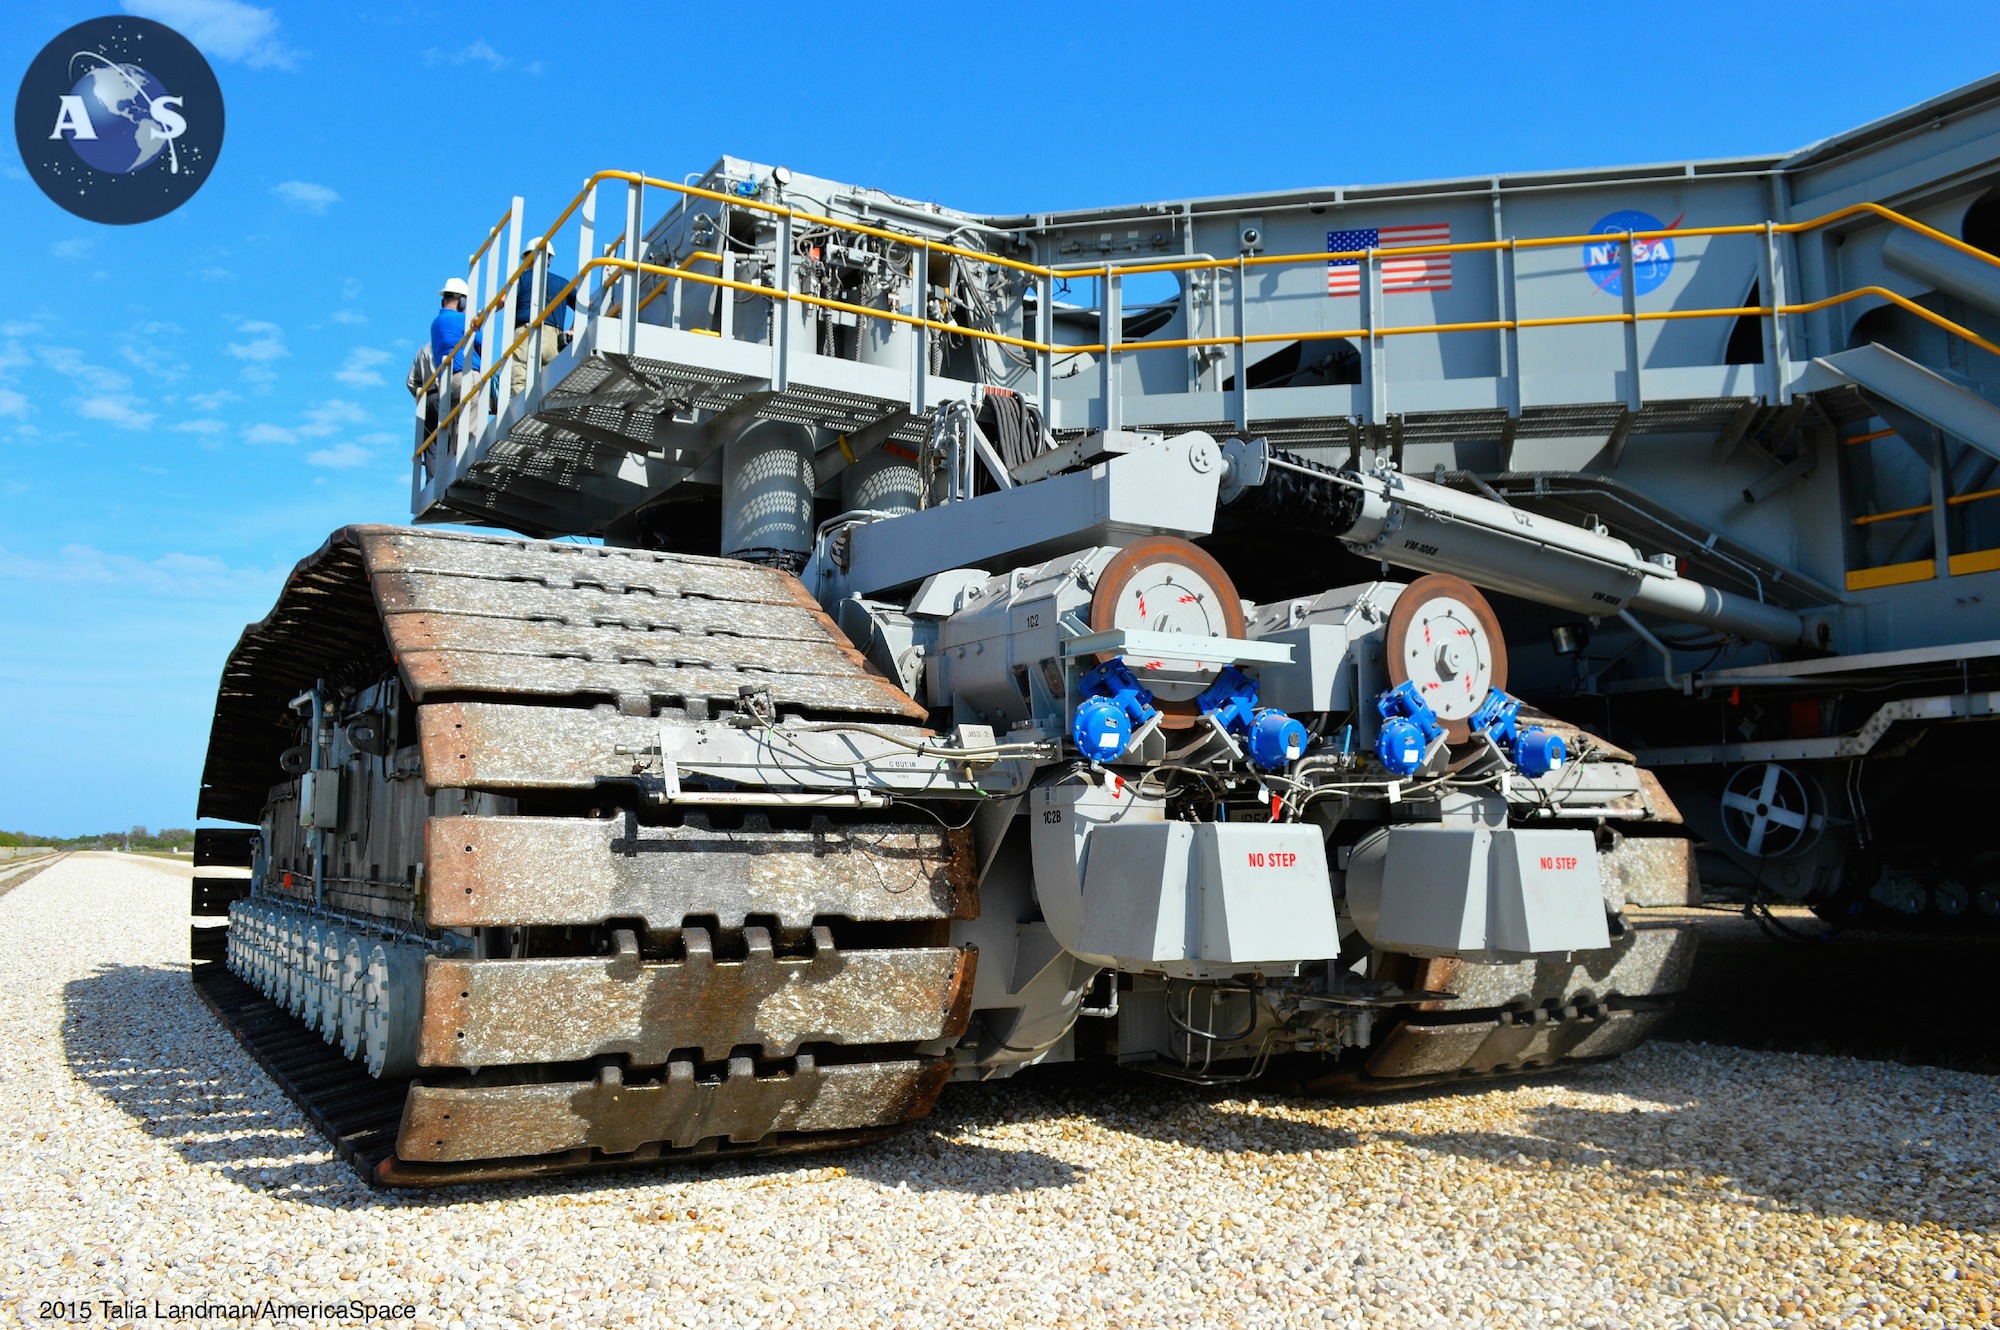 NASA’s crawler-transporters have been hauling rockets and spacecraft to launch pad for 50 years. Image credit: Talia Landman/AmericaSpace